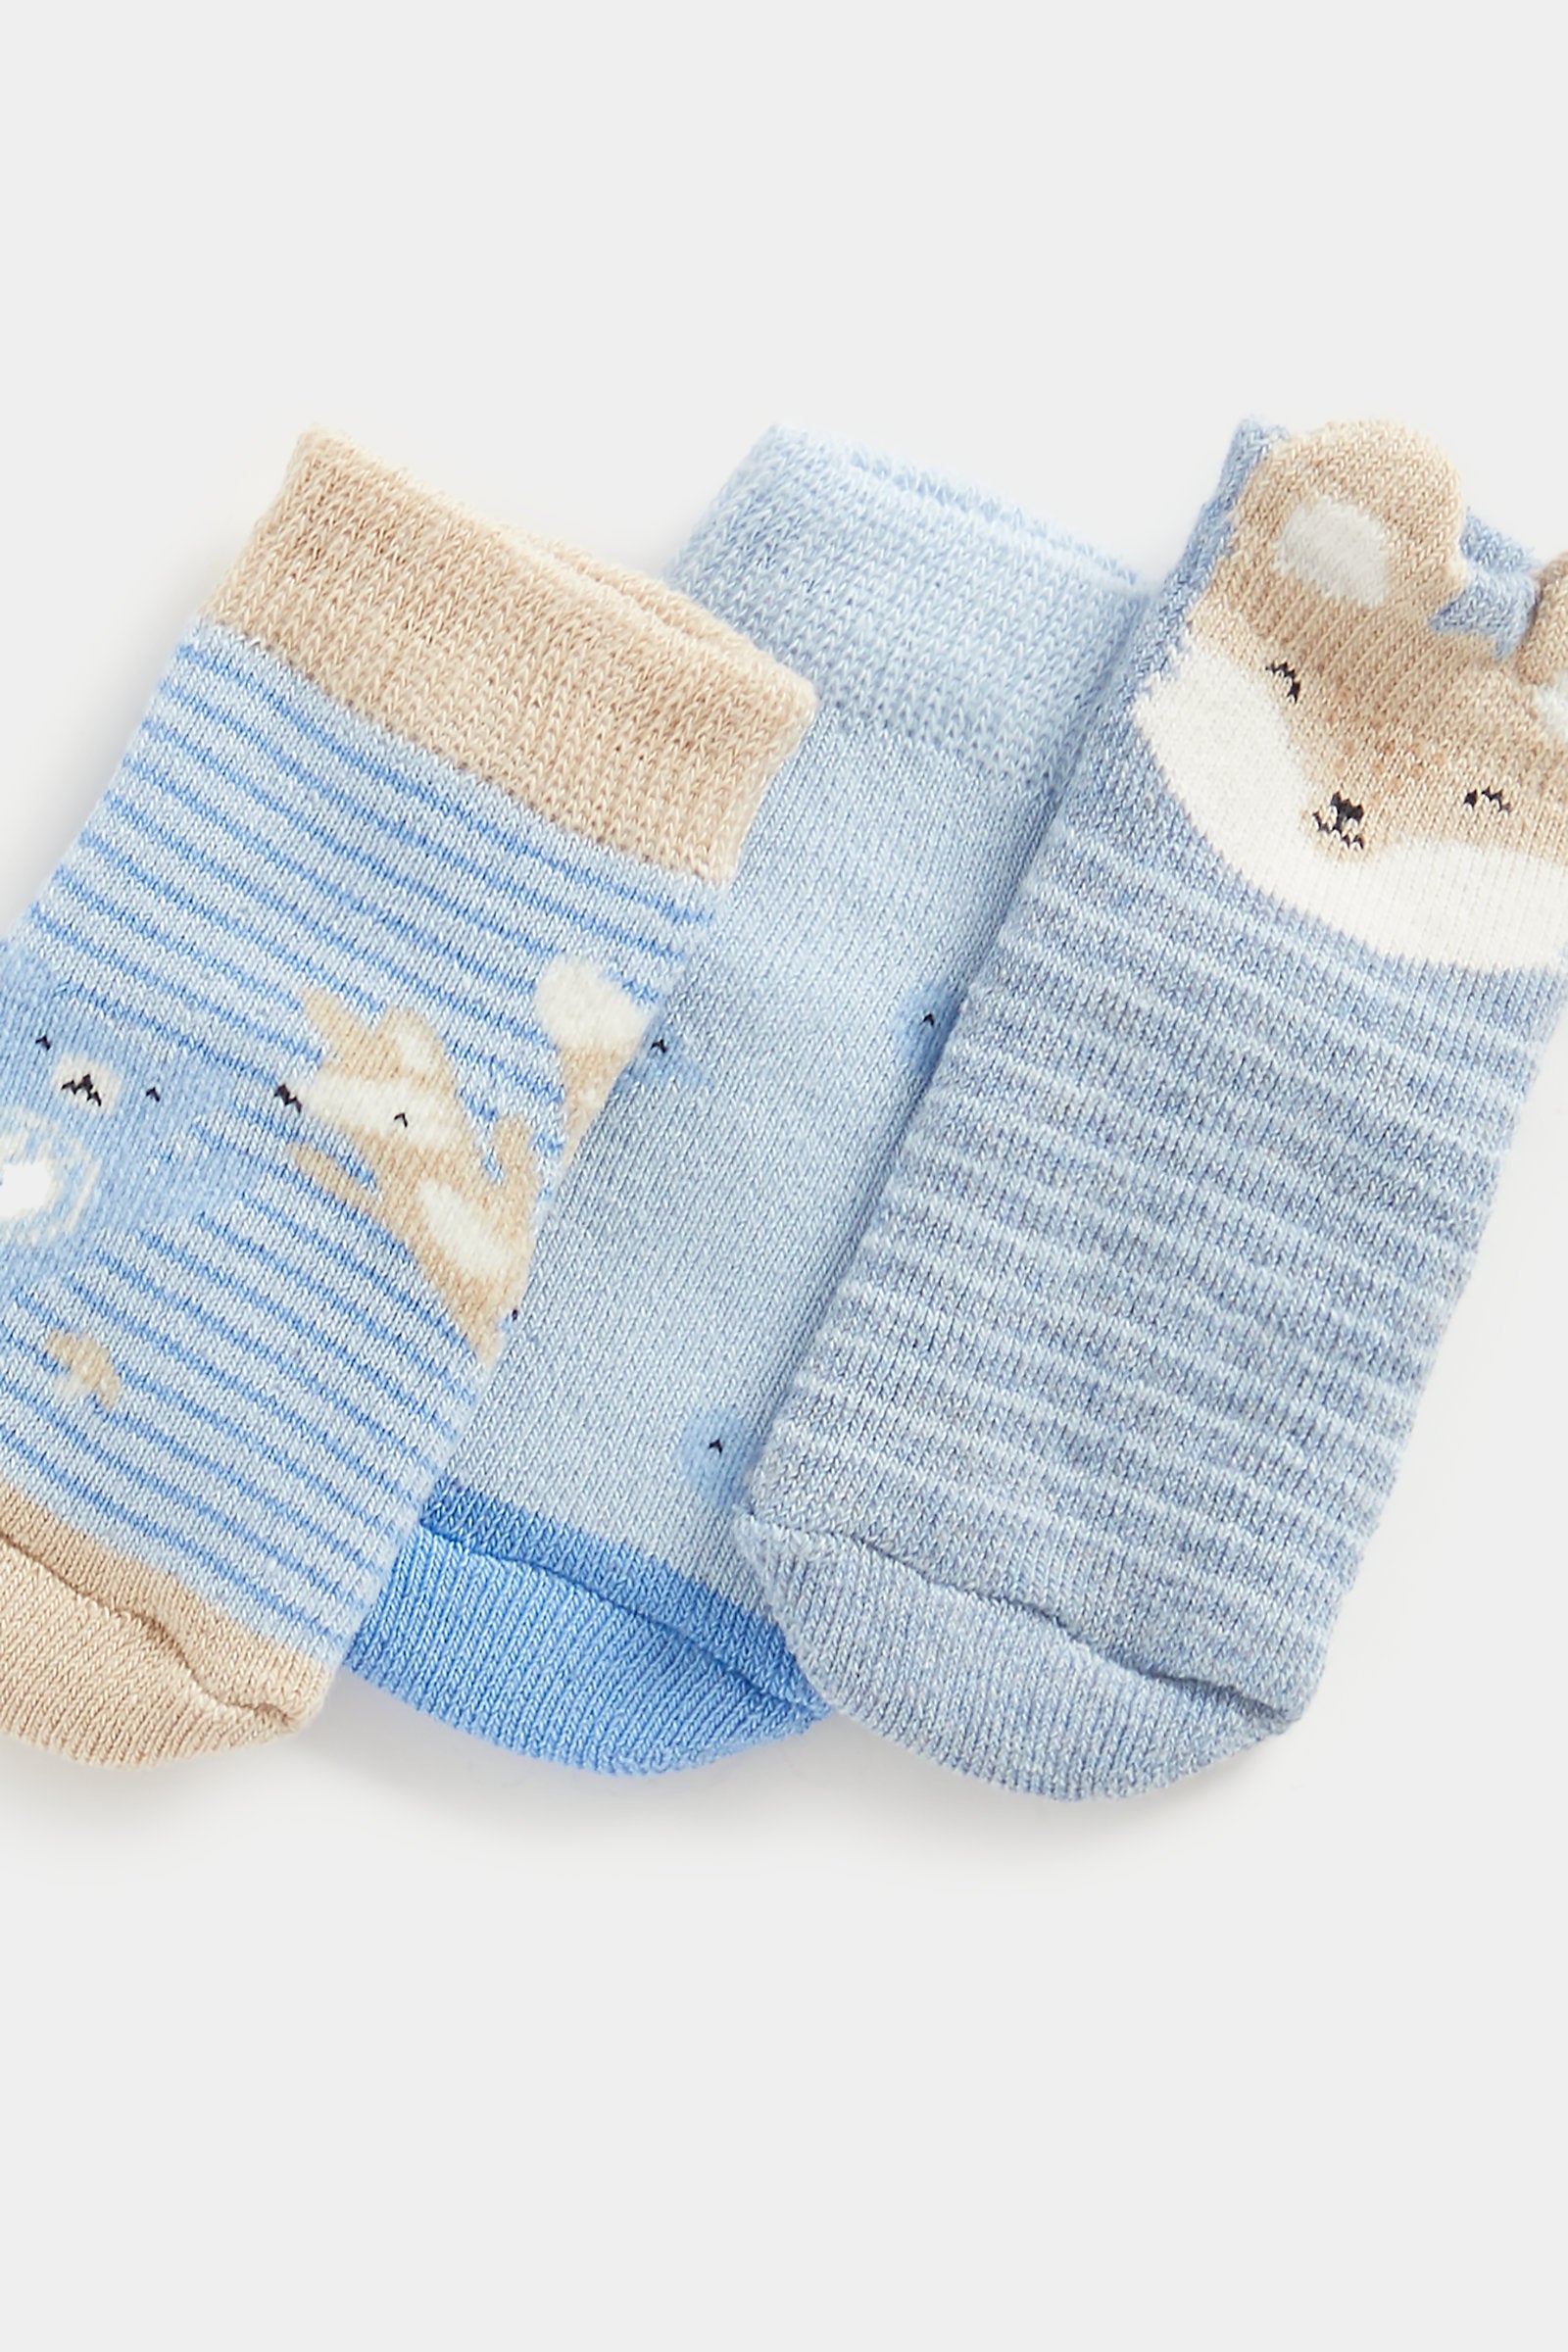 Mothercare Fox Terry Baby Socks - 3 Pack